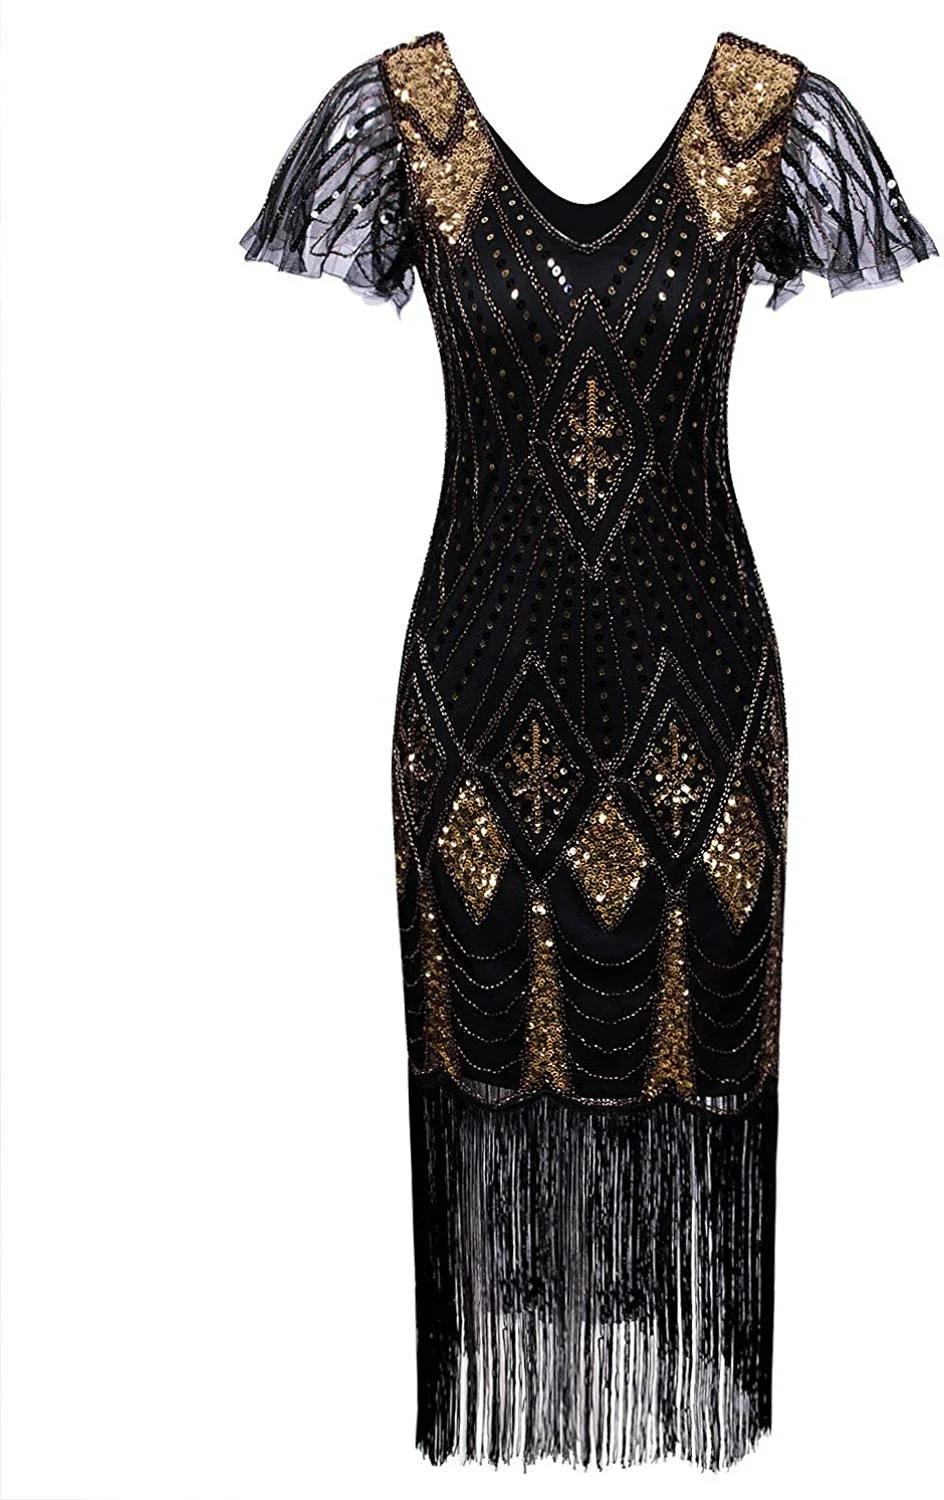 Women's 1920s Gatsby Inspired Sequin Beads Long Fringe Flapper Dress with Sleeves